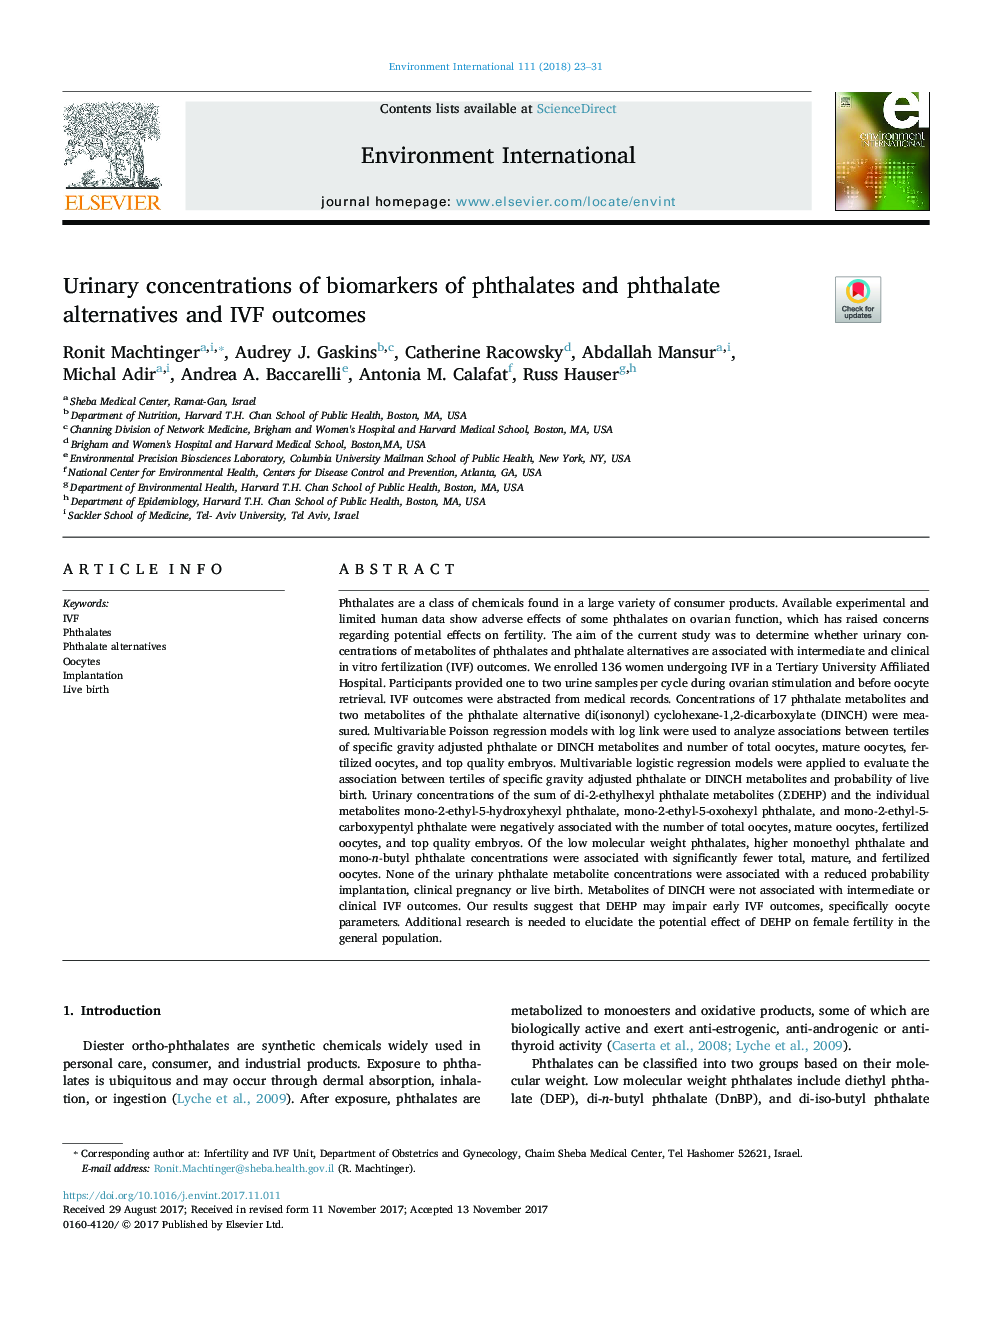 Urinary concentrations of biomarkers of phthalates and phthalate alternatives and IVF outcomes